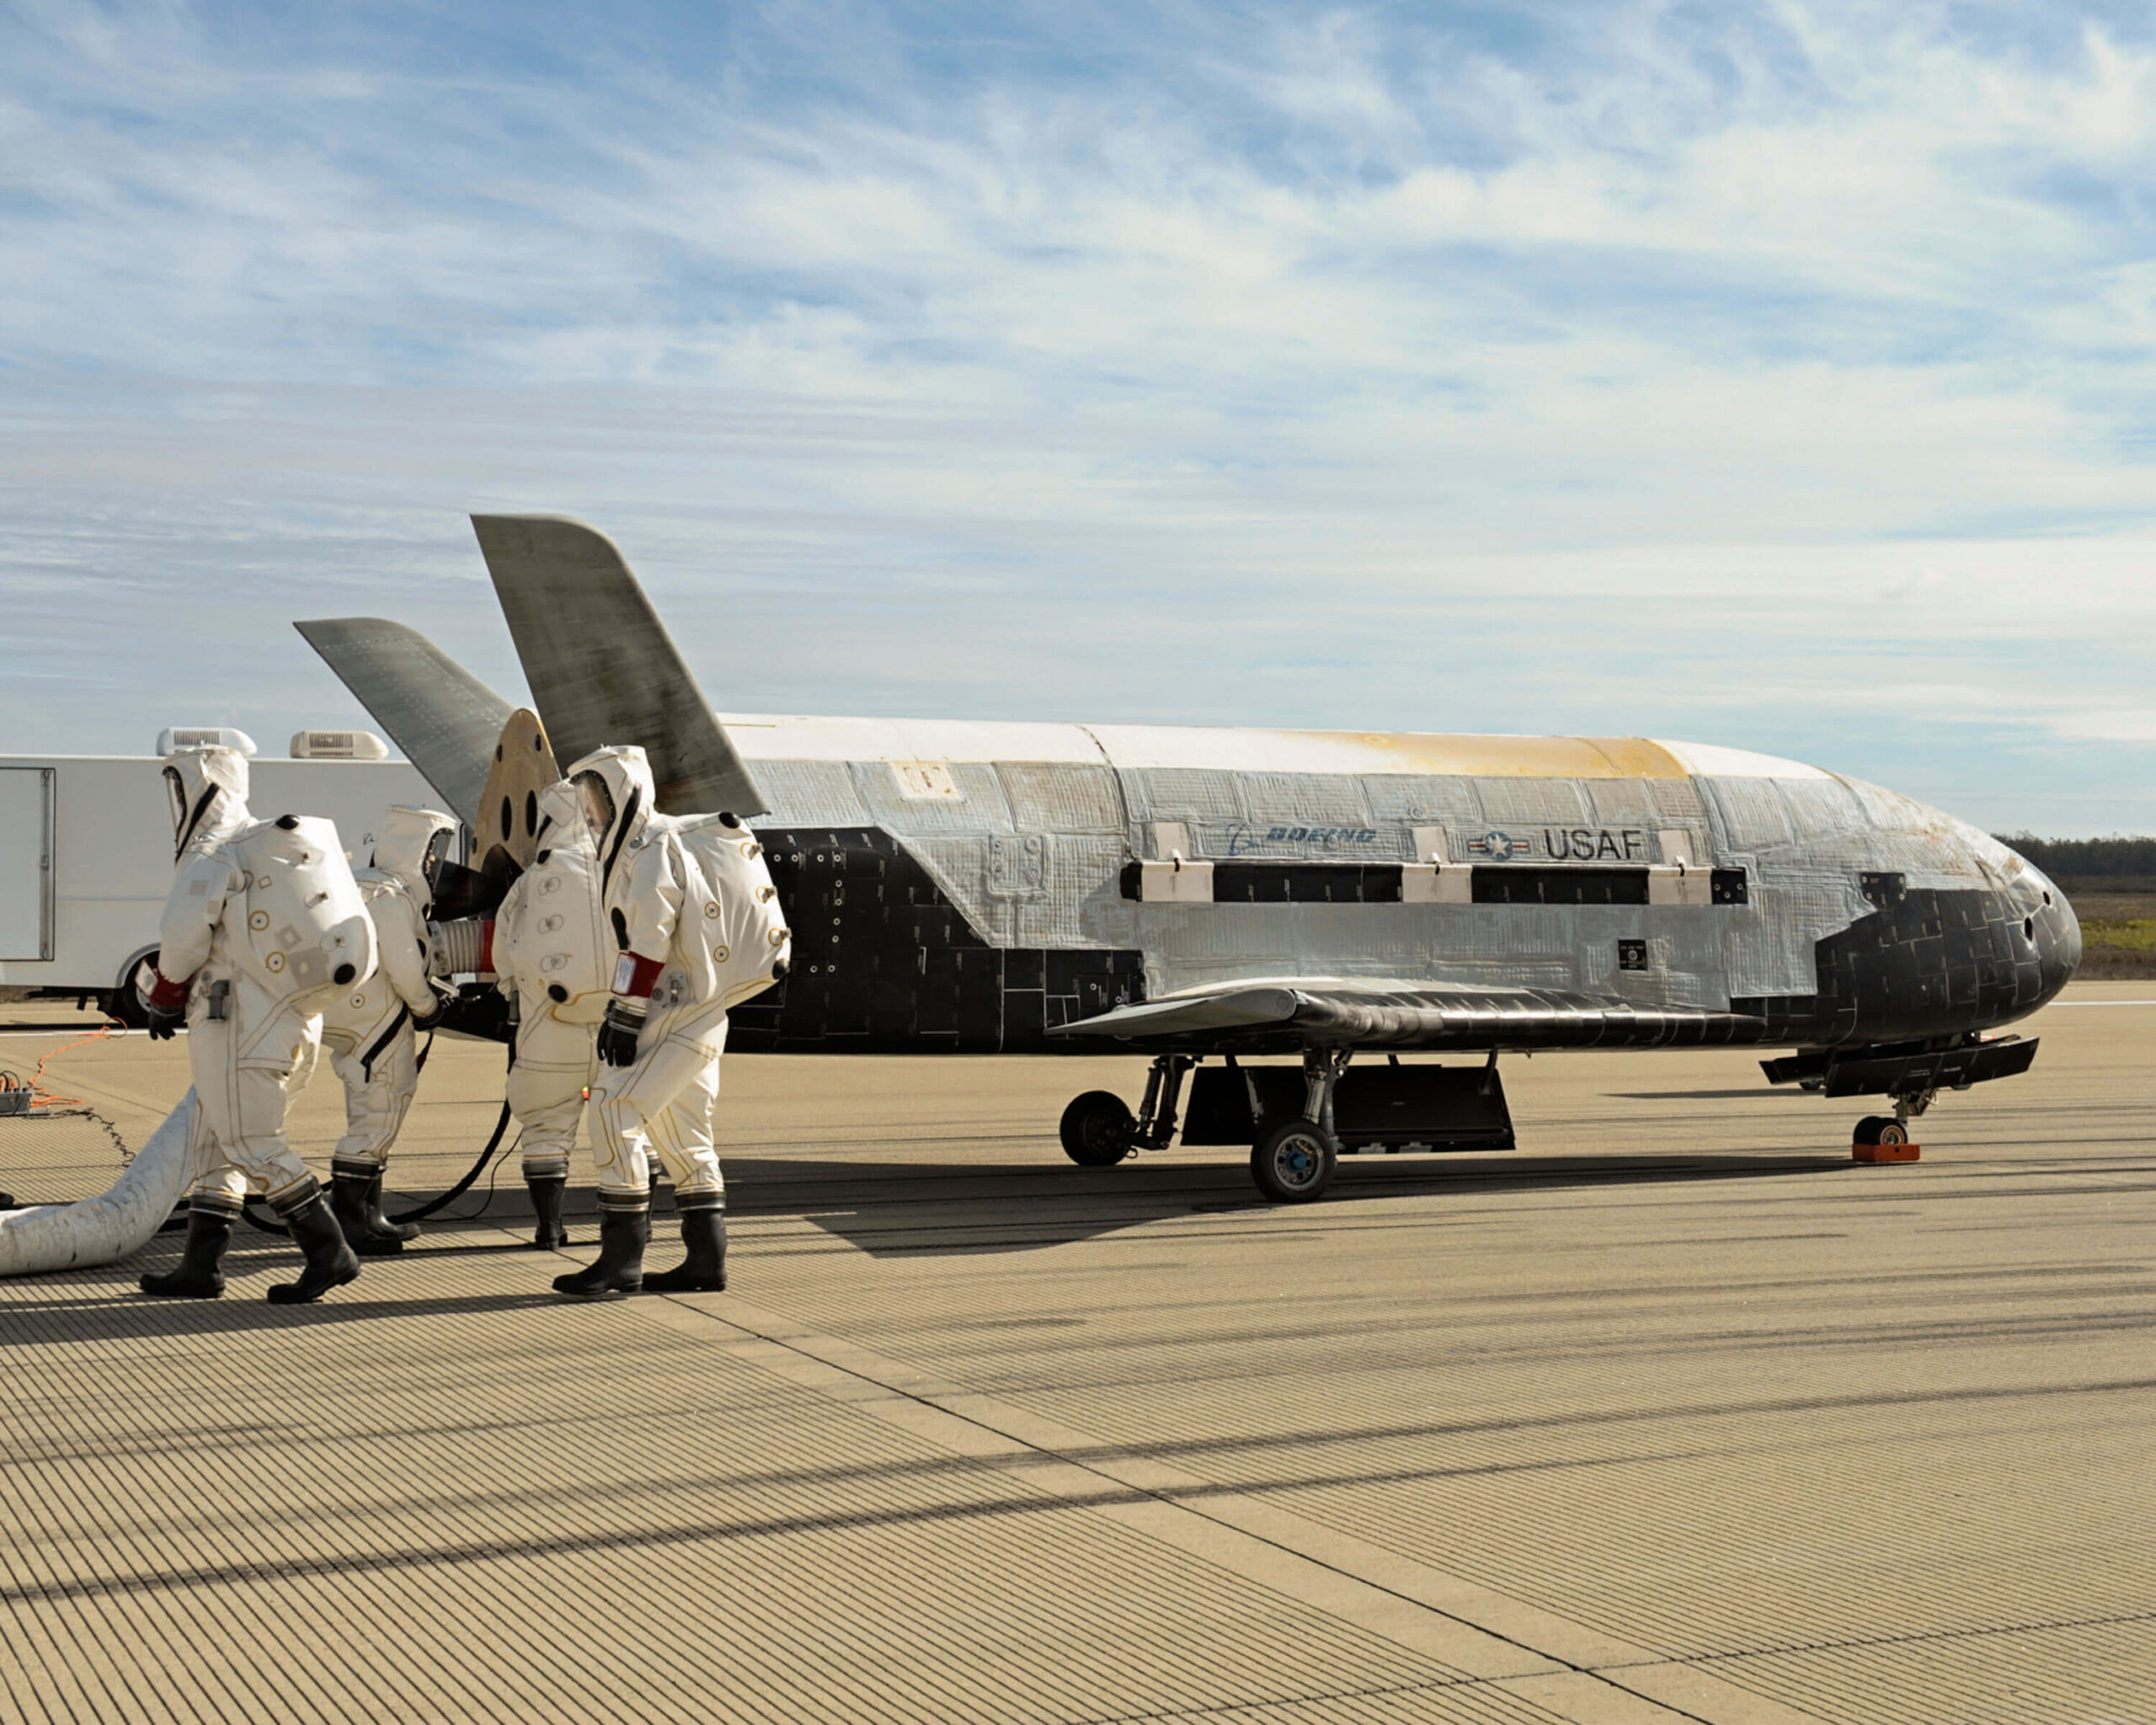 The Space Force’s X-37B spaceplane returns to Earth after over two years in space